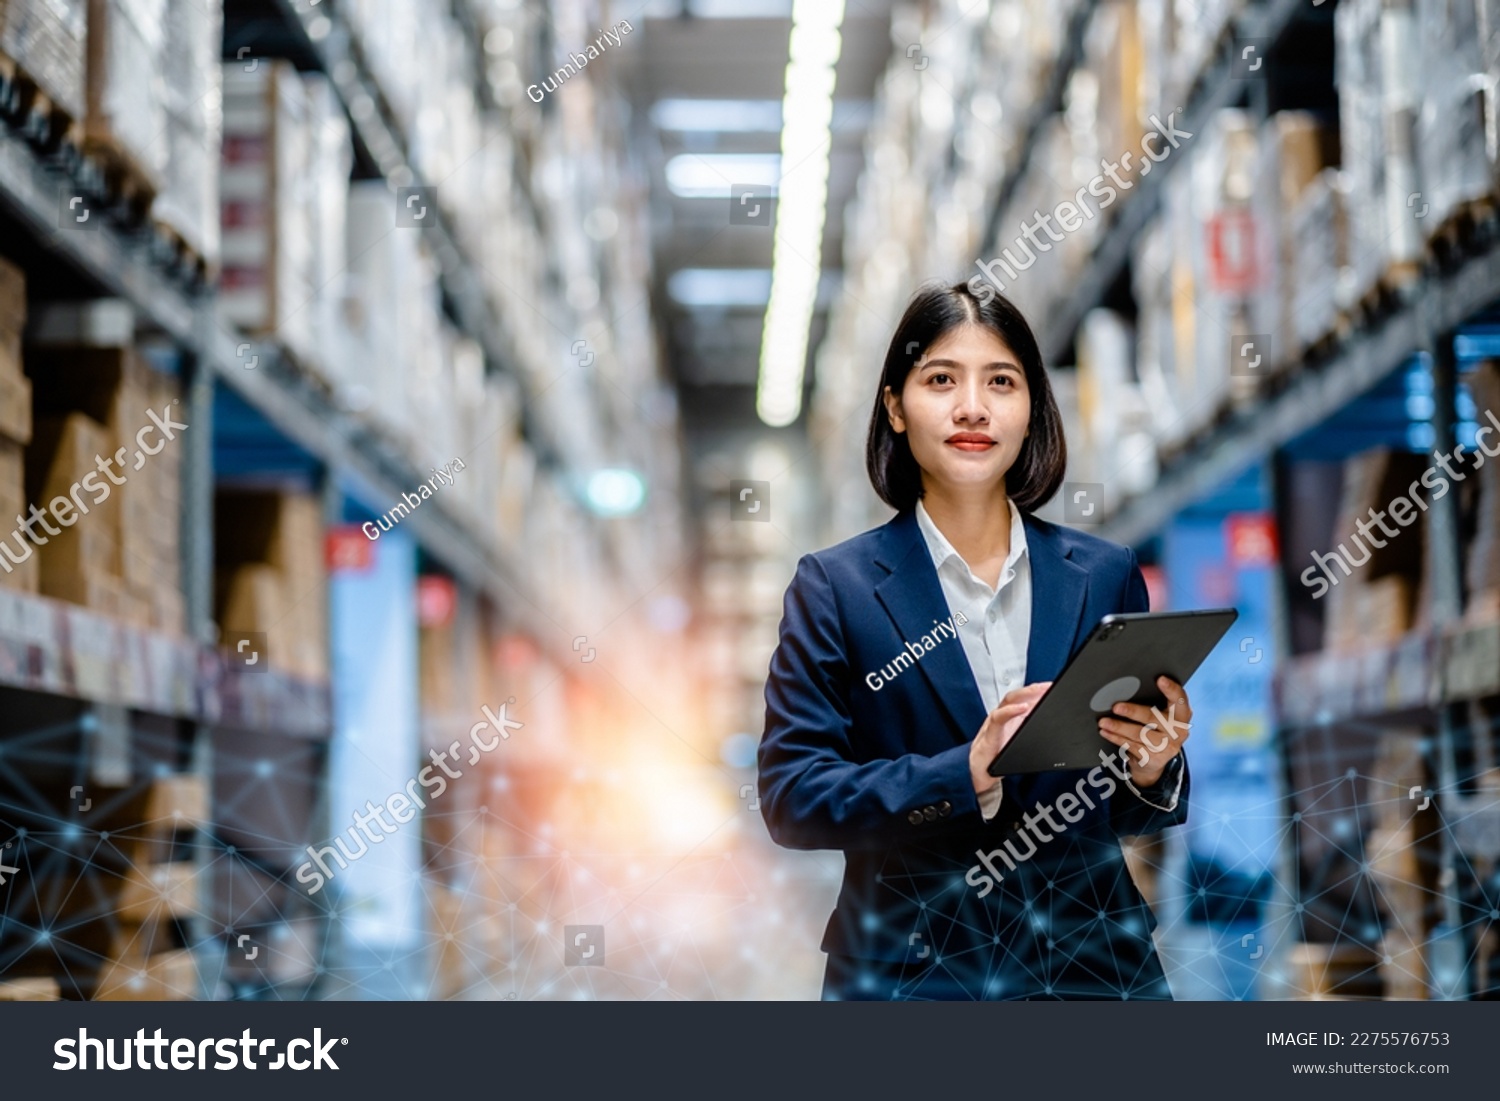 Business women use a digital tablet to manage the stock inventory on shelves in the large warehouse, smart cargo management system, supply chain and logistic network technology concept. #2275576753